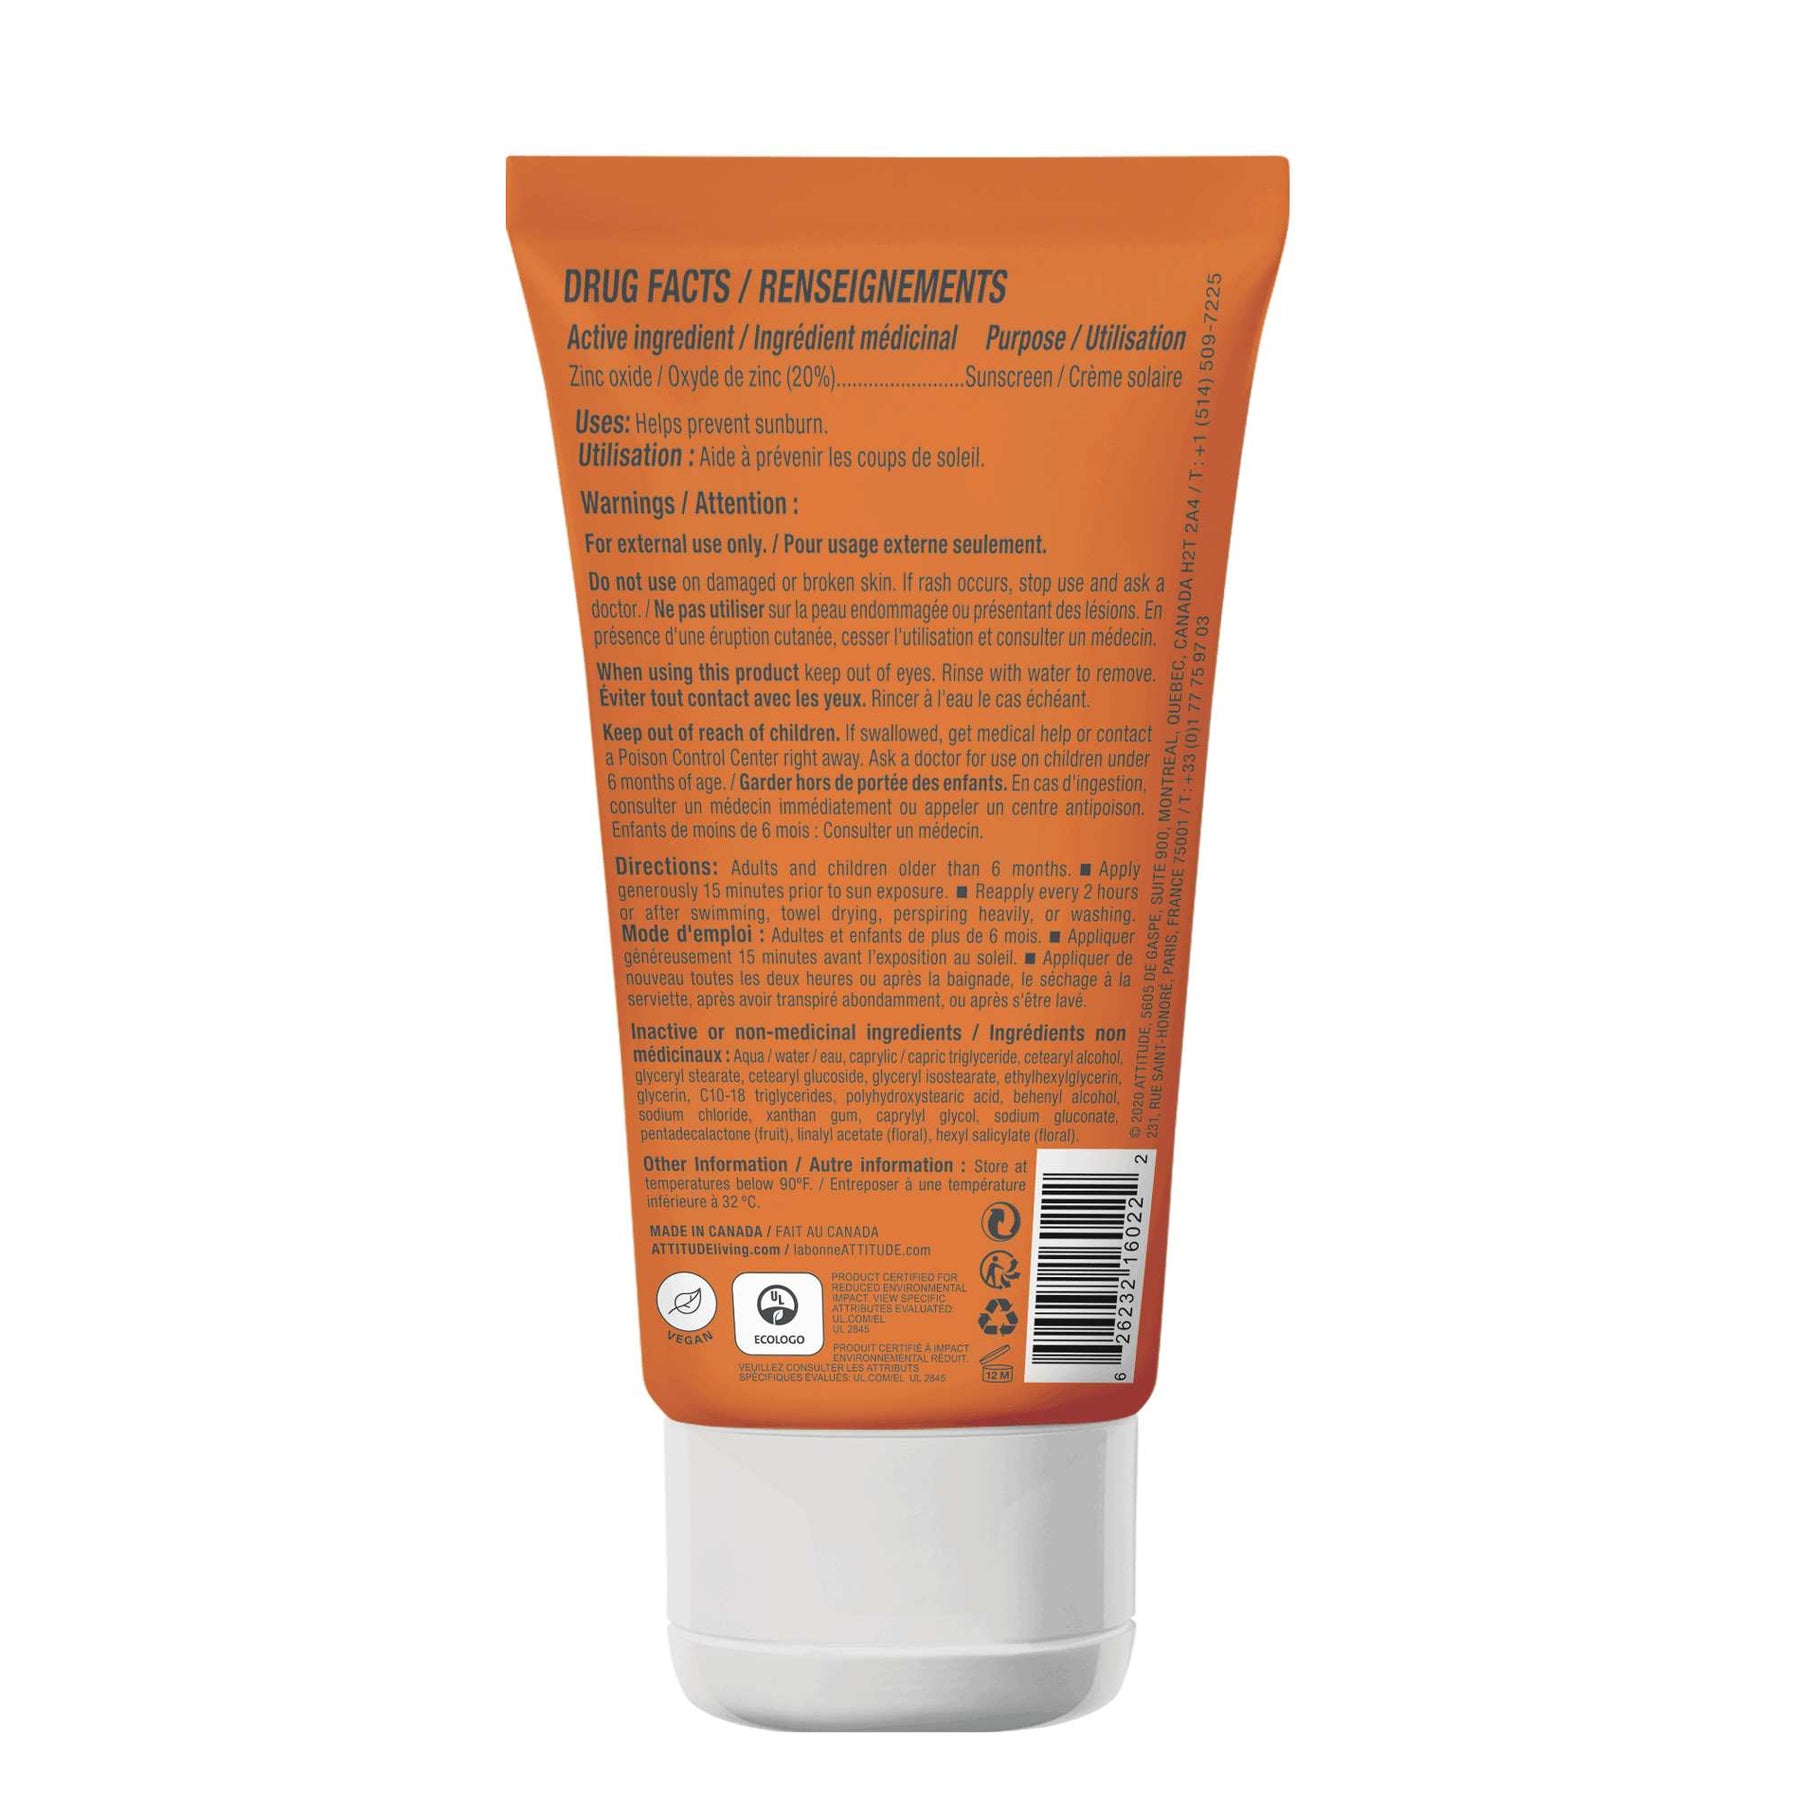 Moisturizer Mineral Sunscreen : SPF 30 - by ATTITUDE |ProCare Outlet|